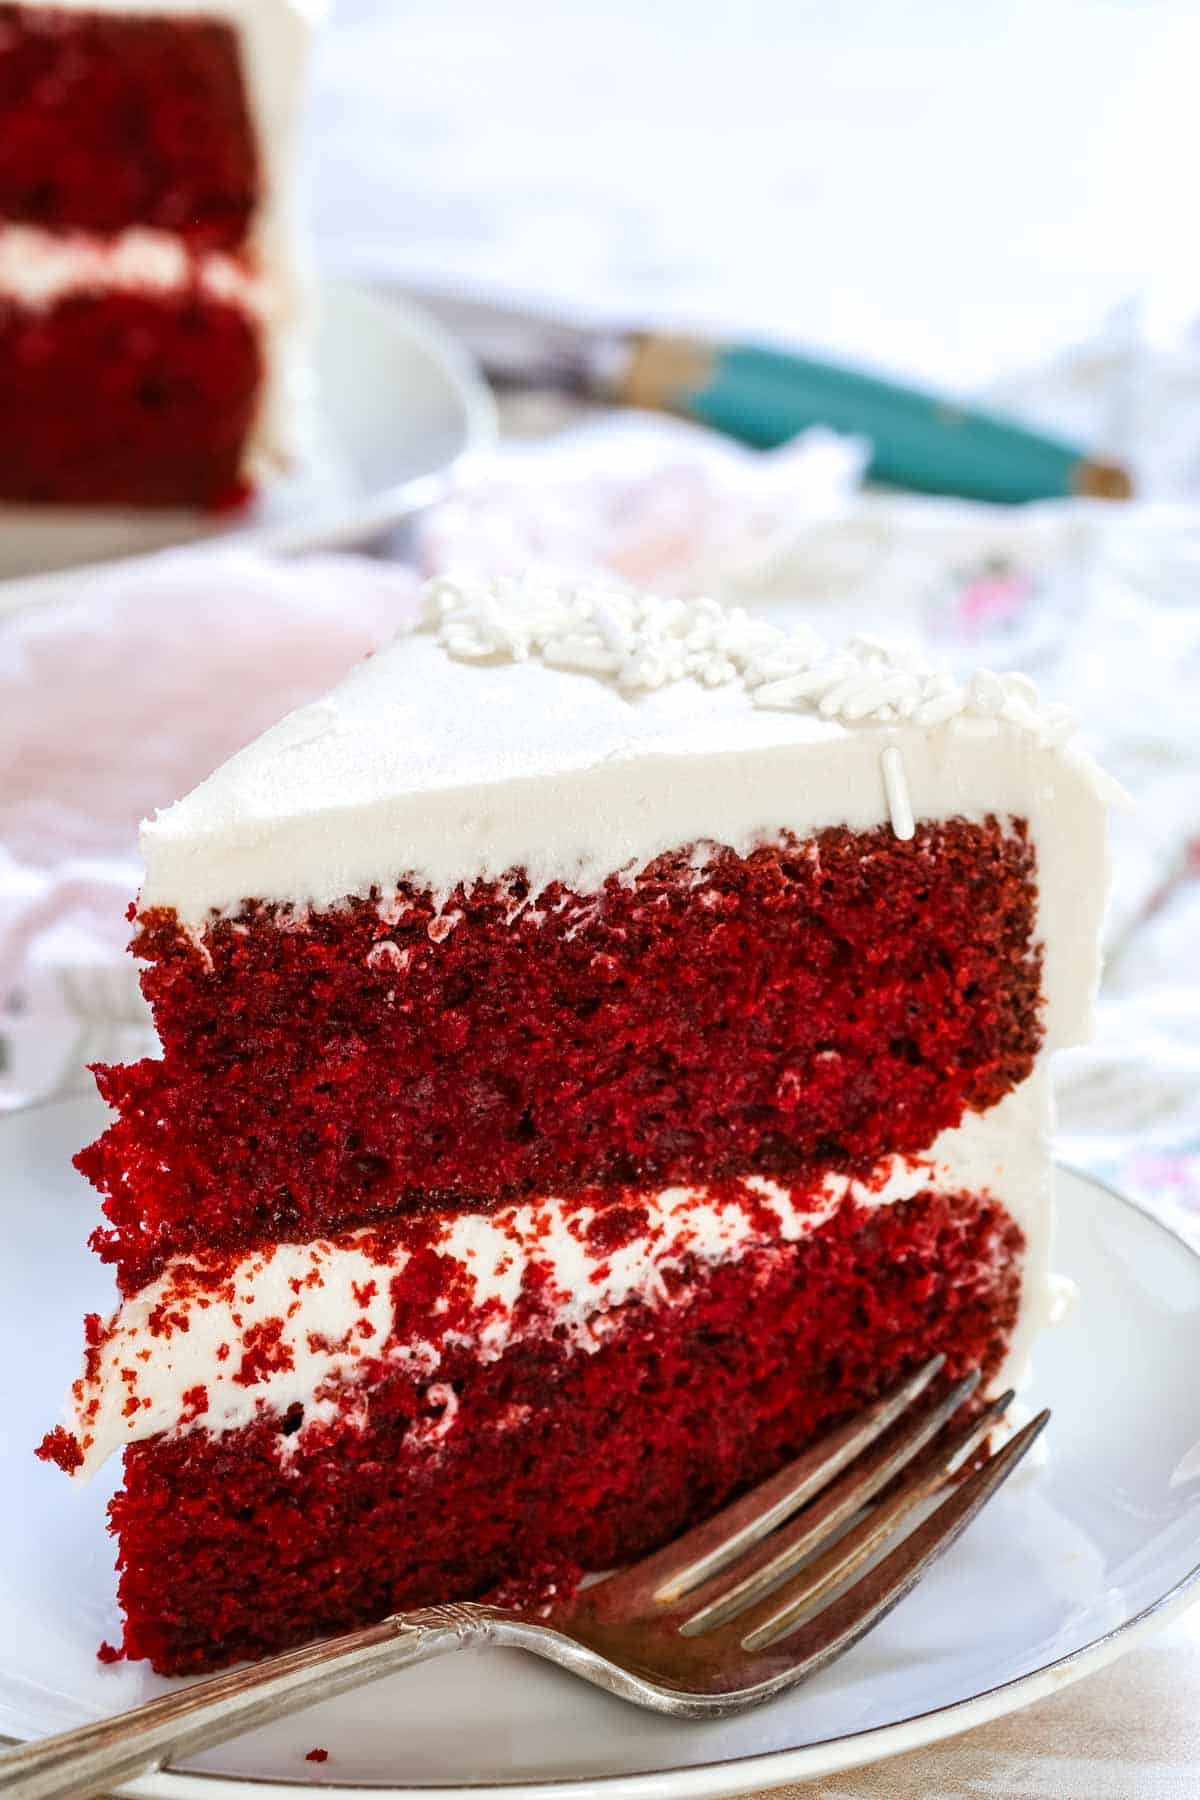 A slice of gluten-free red velvet cake on a white plate next to a fork.